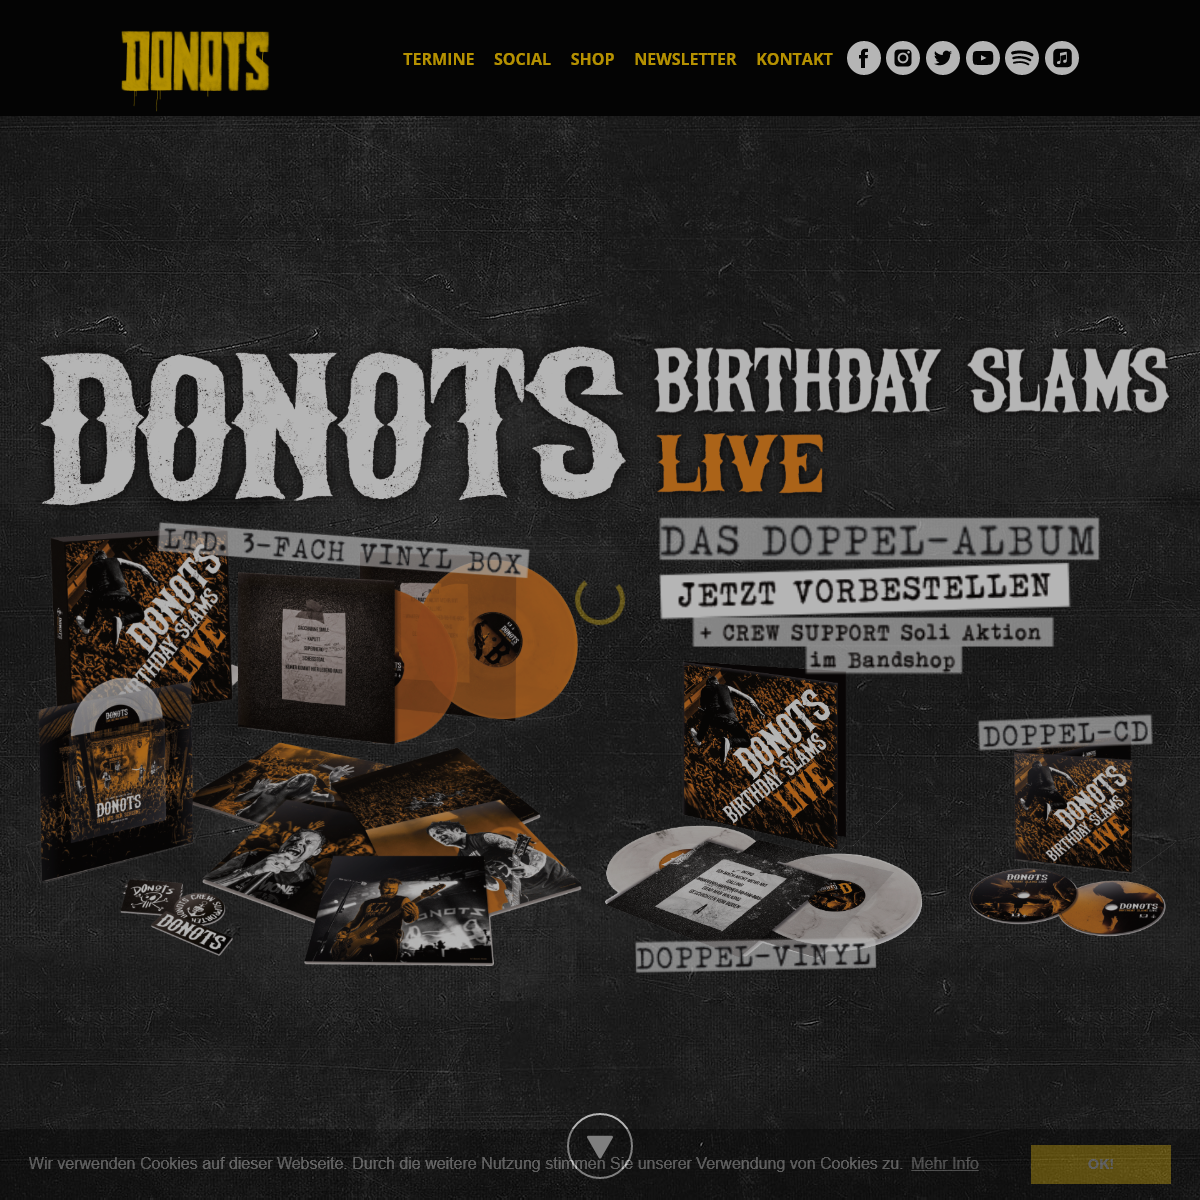 A complete backup of donots.com